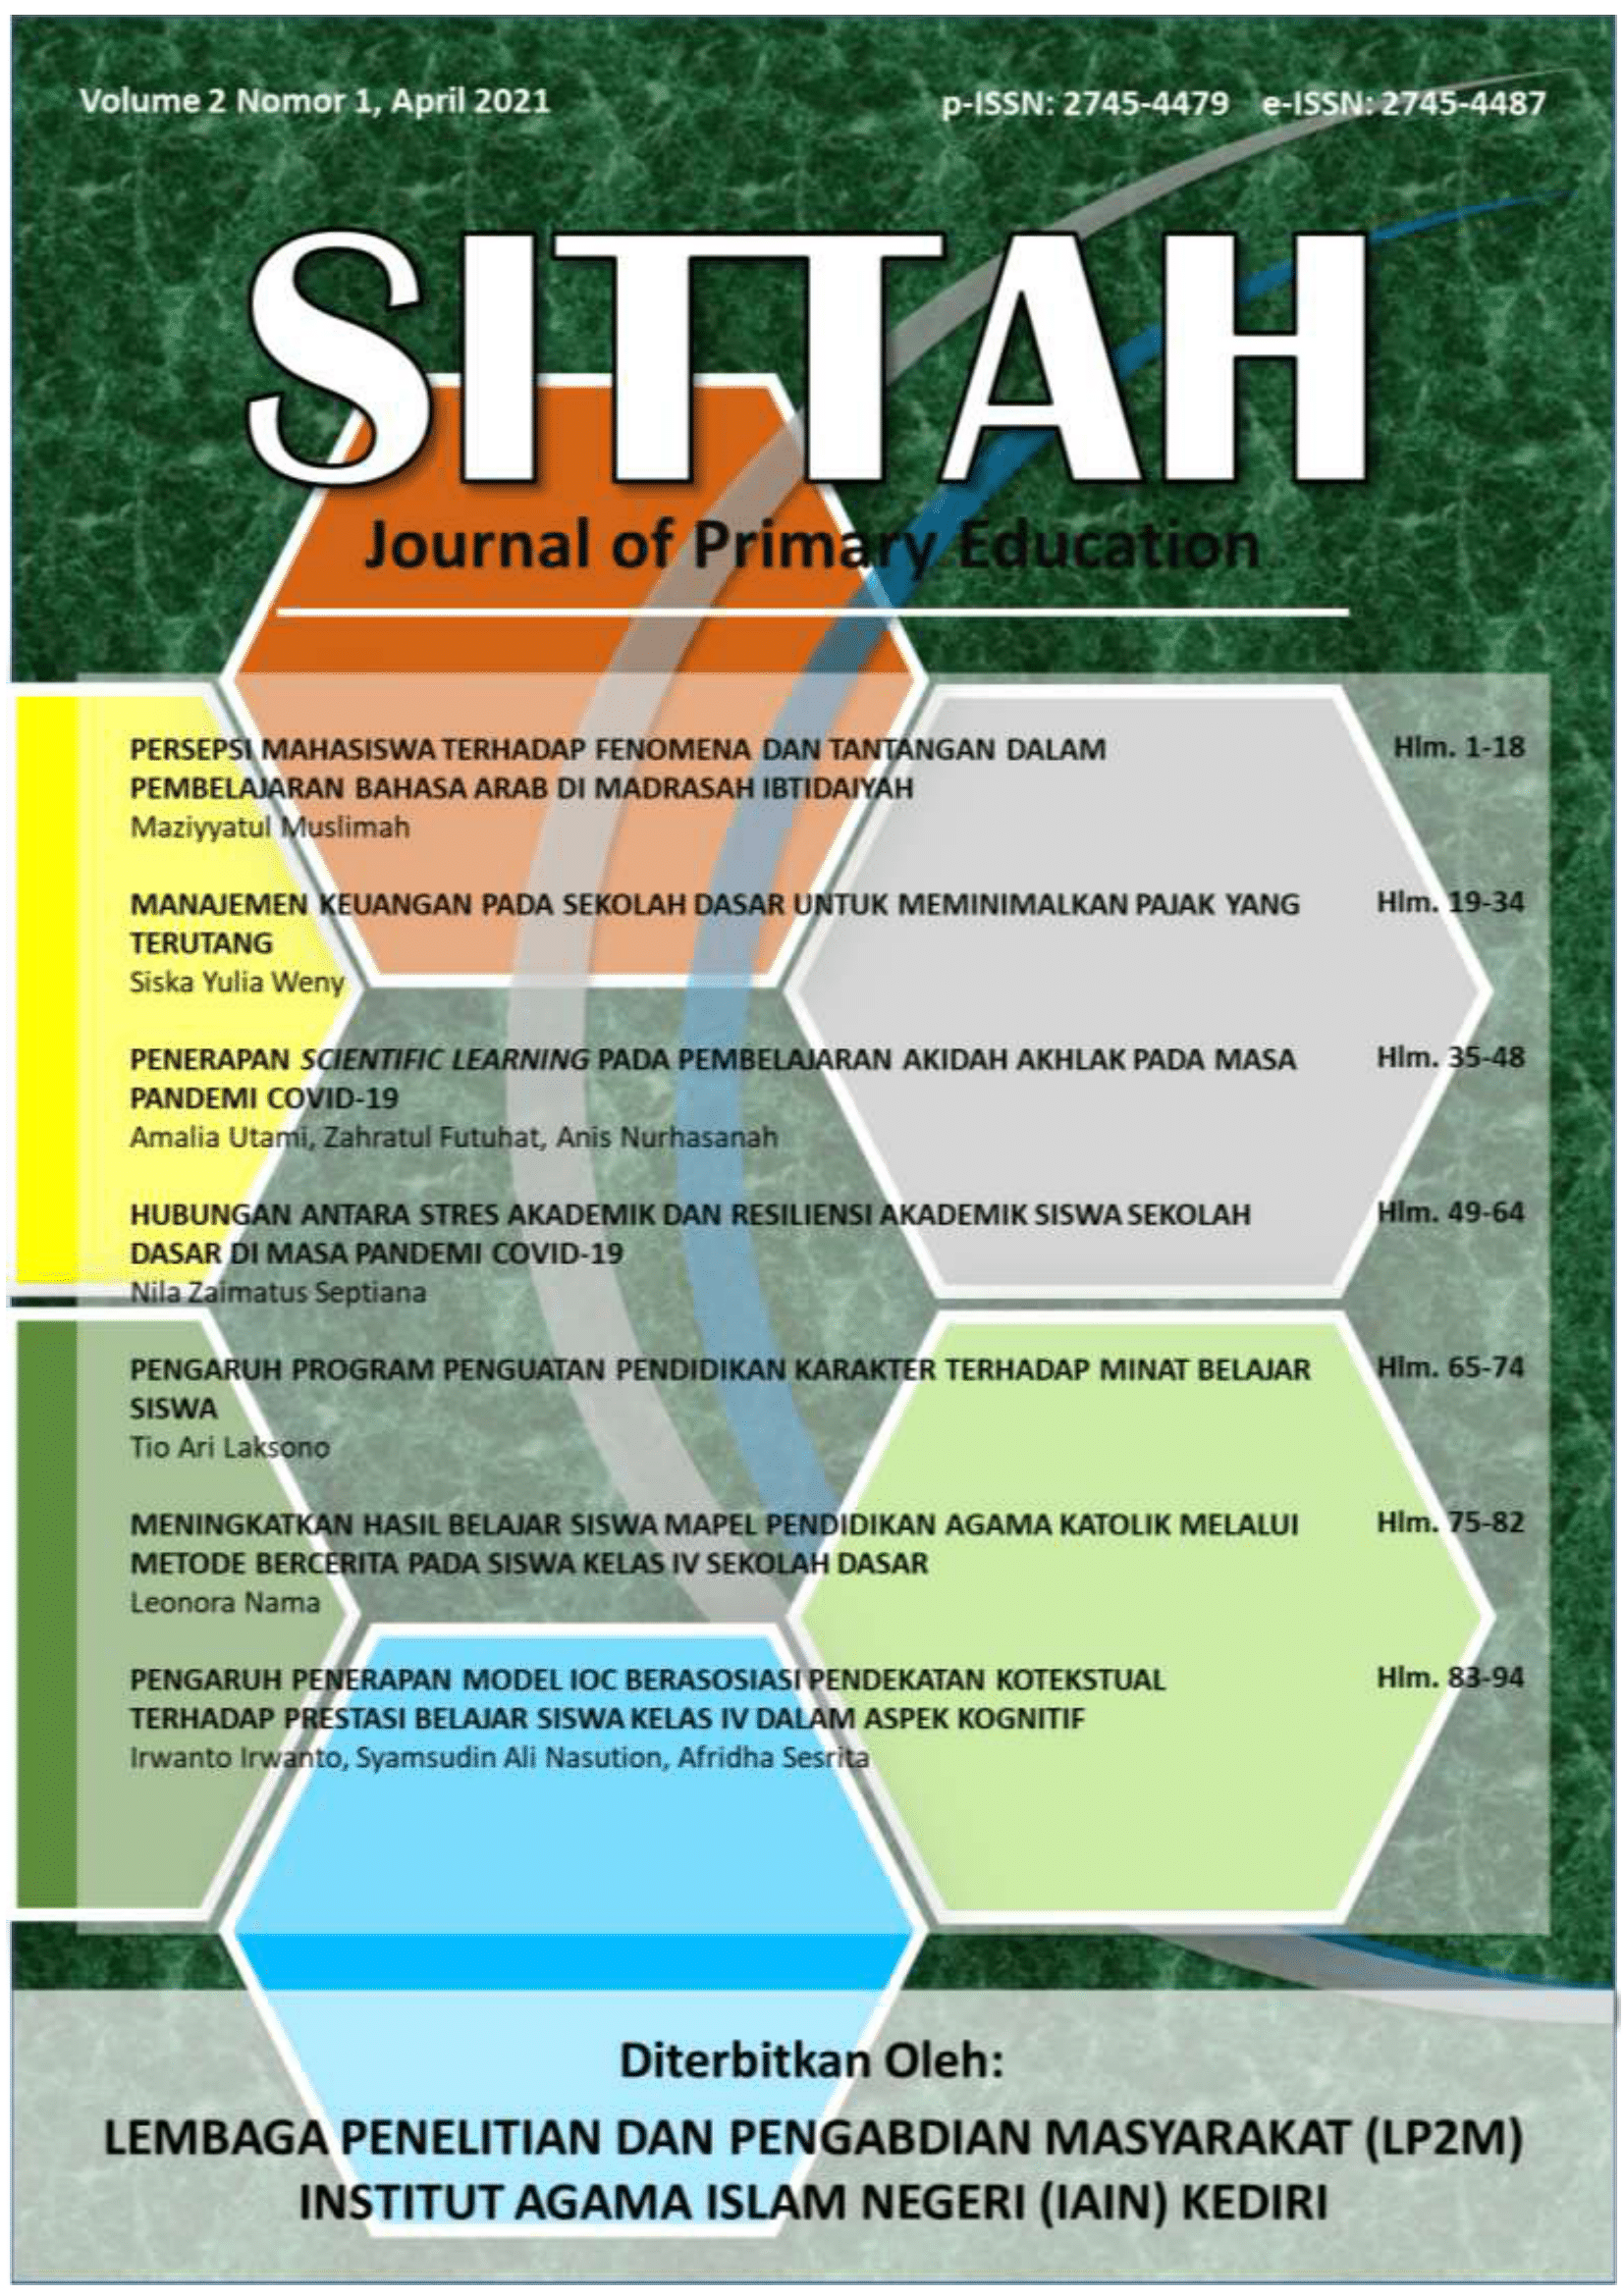 					View Vol. 2 No. 1 (2021): SITTAH: Journal of Primary Education
				